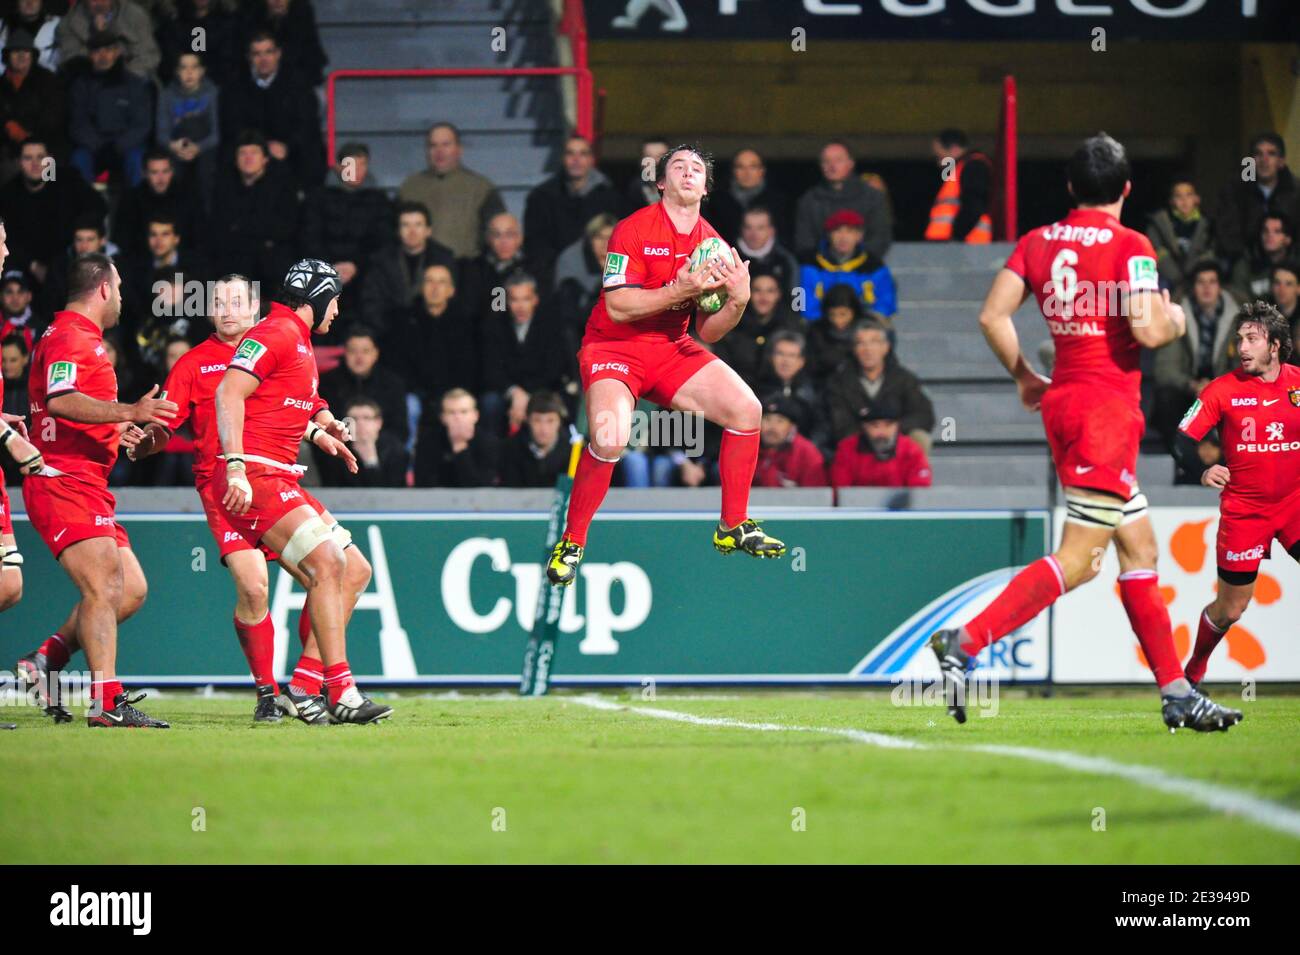 Stade Toulousain's Louis Picamoles in the air during the H-Cup Rugby match Stade  Toulousain vs Glasgow at the Ernest Wallon Stadium in Toulouse, France on  December 21, 2010. Toulouse won 36-10. Photo